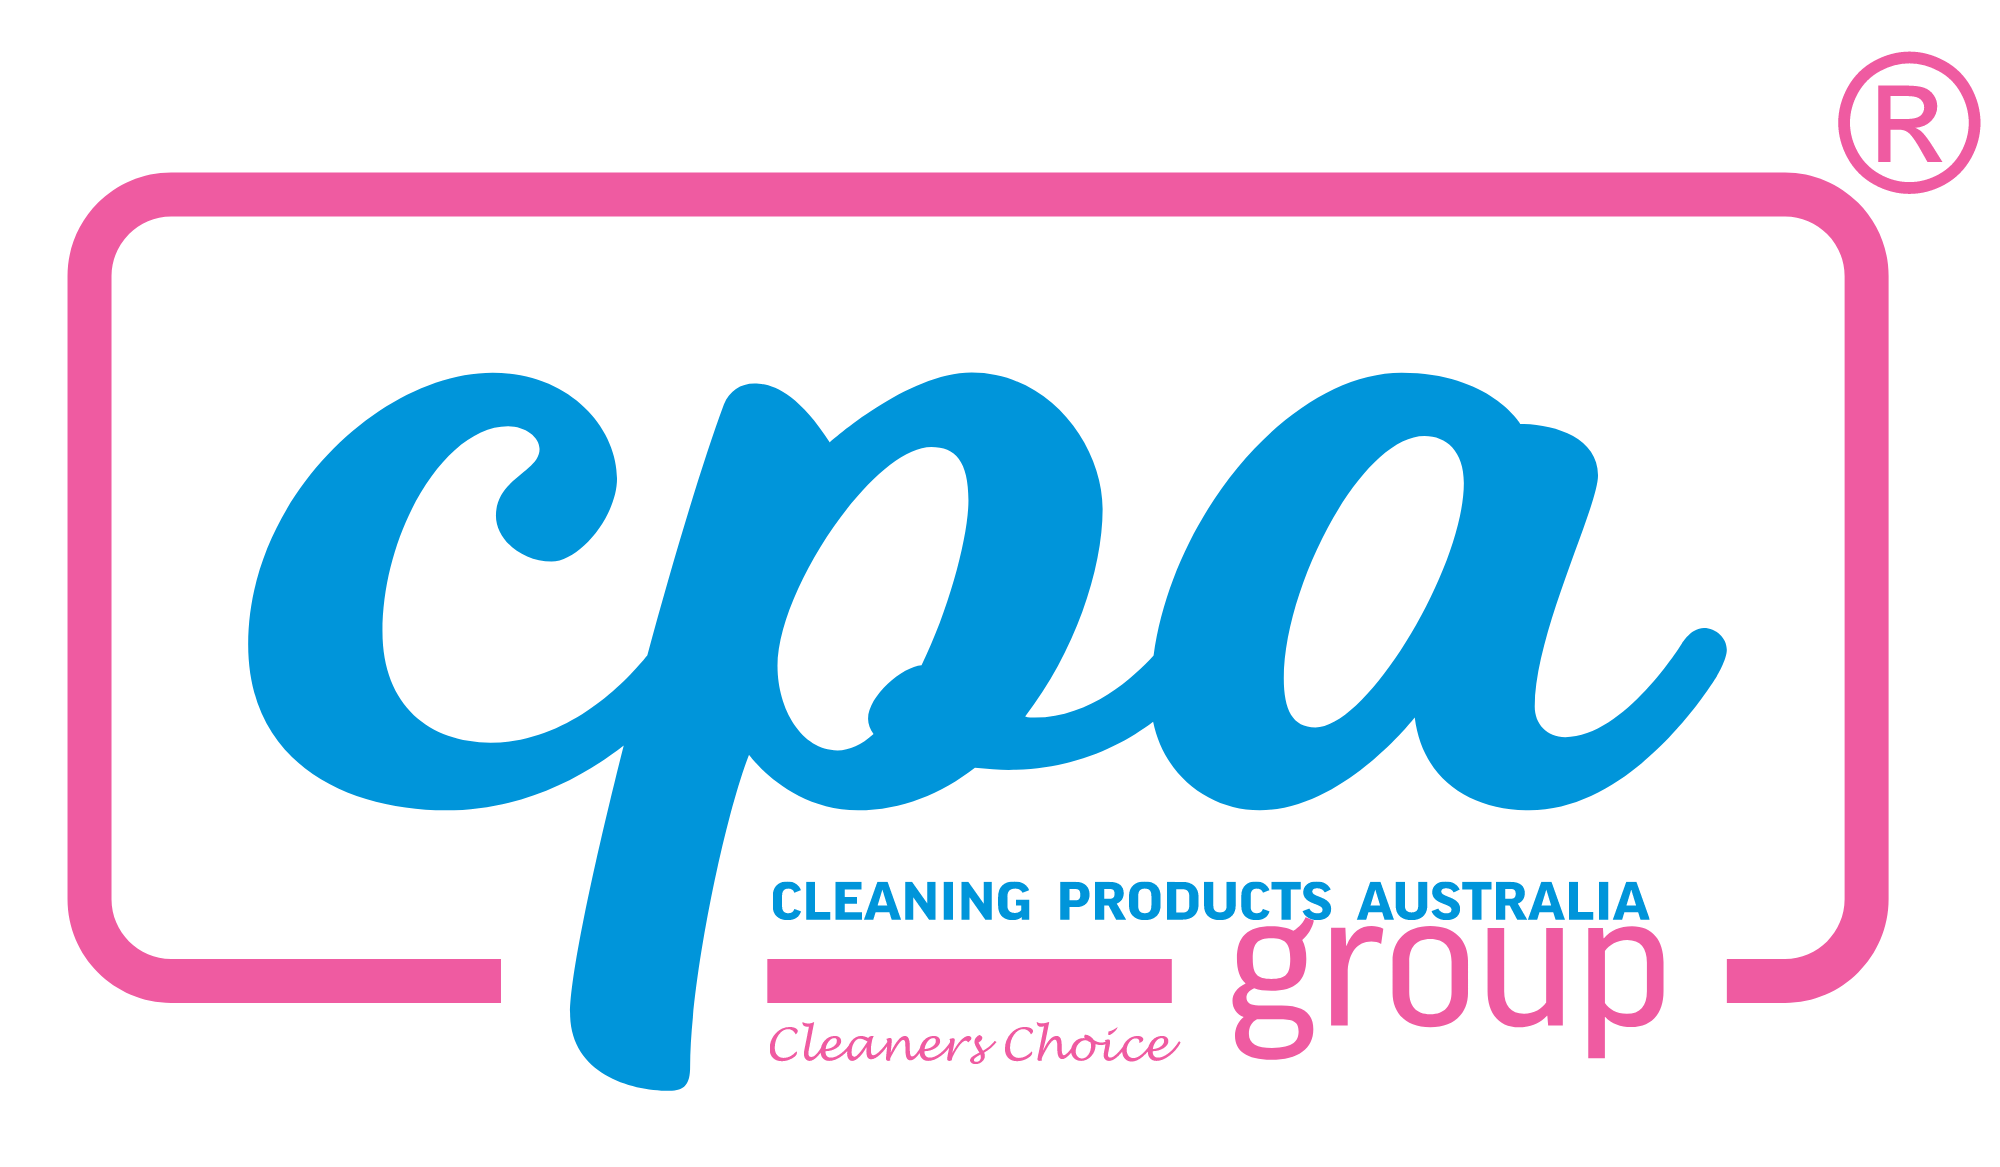 Cleaning Products Australia Group